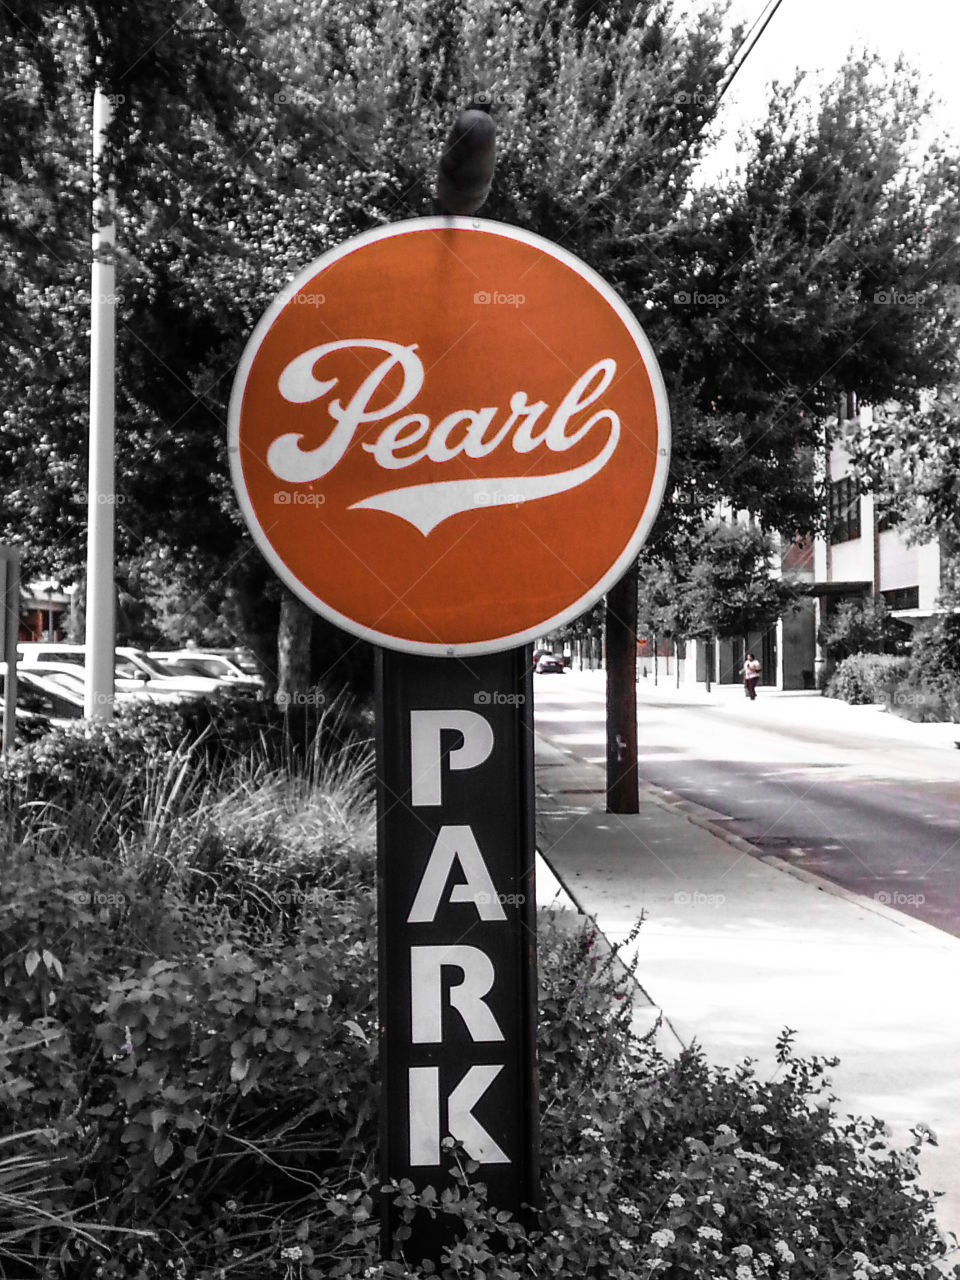 Pearl on Park